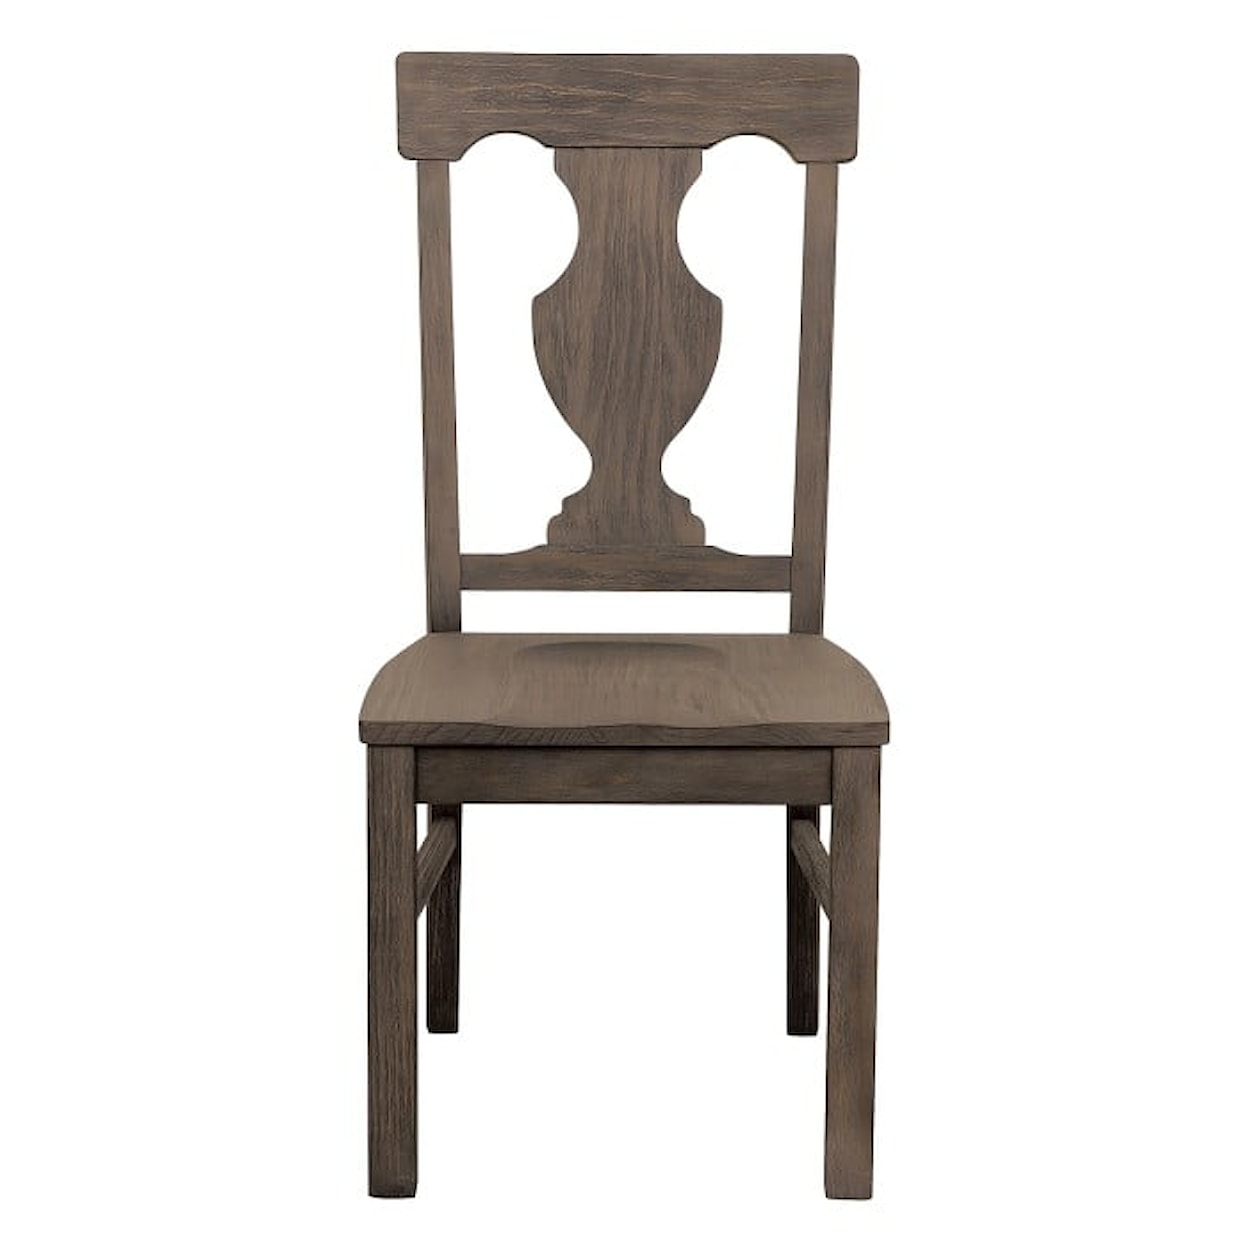 Homelegance Furniture Toulon Side Chair